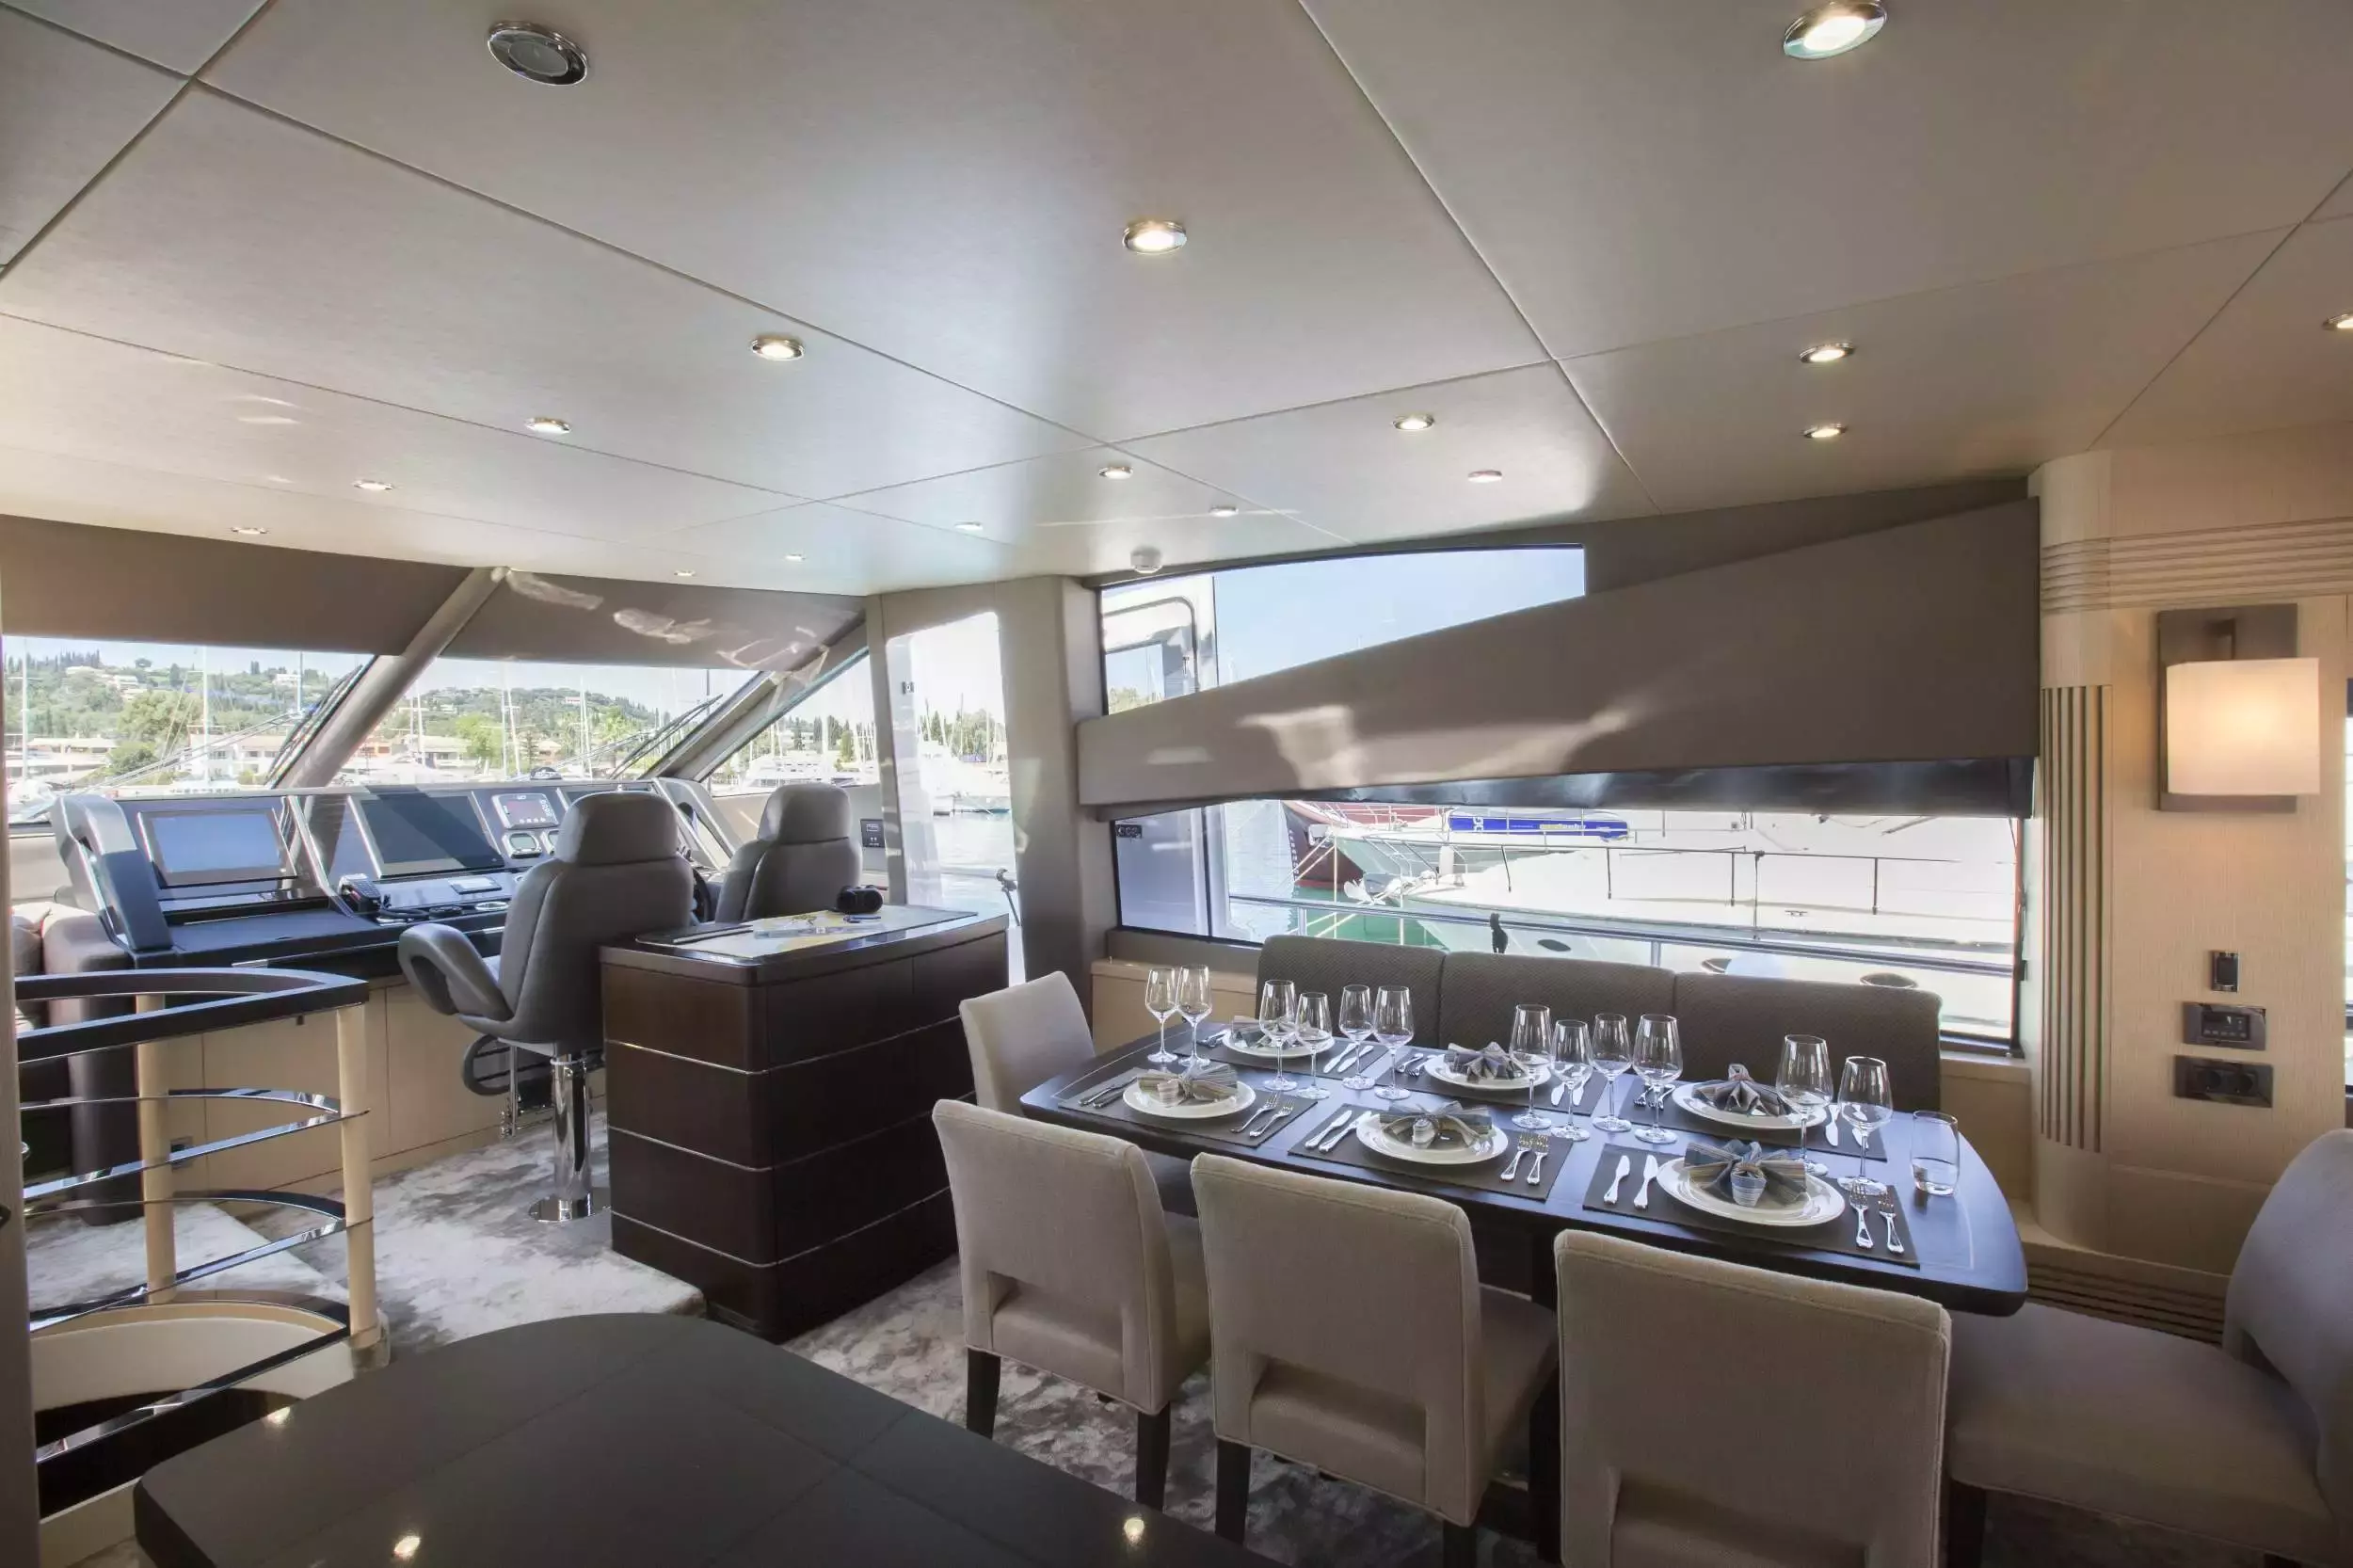 Finezza by Sunseeker - Top rates for a Charter of a private Motor Yacht in Cyprus